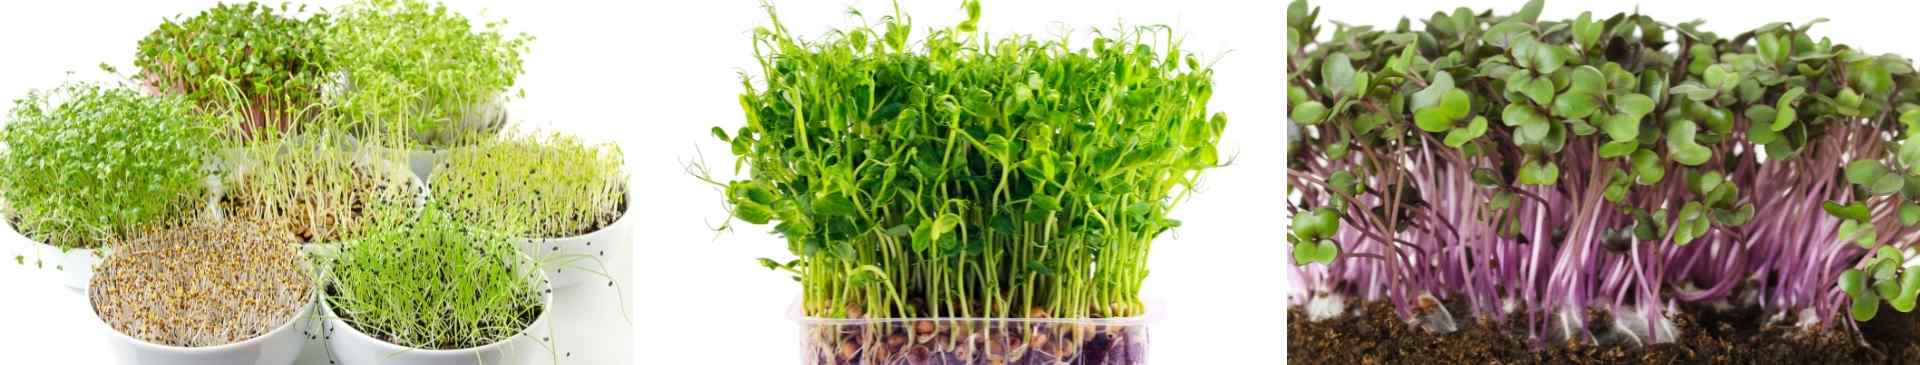 5 Reasons You Should Grow Microgreens for Your Kitchen 